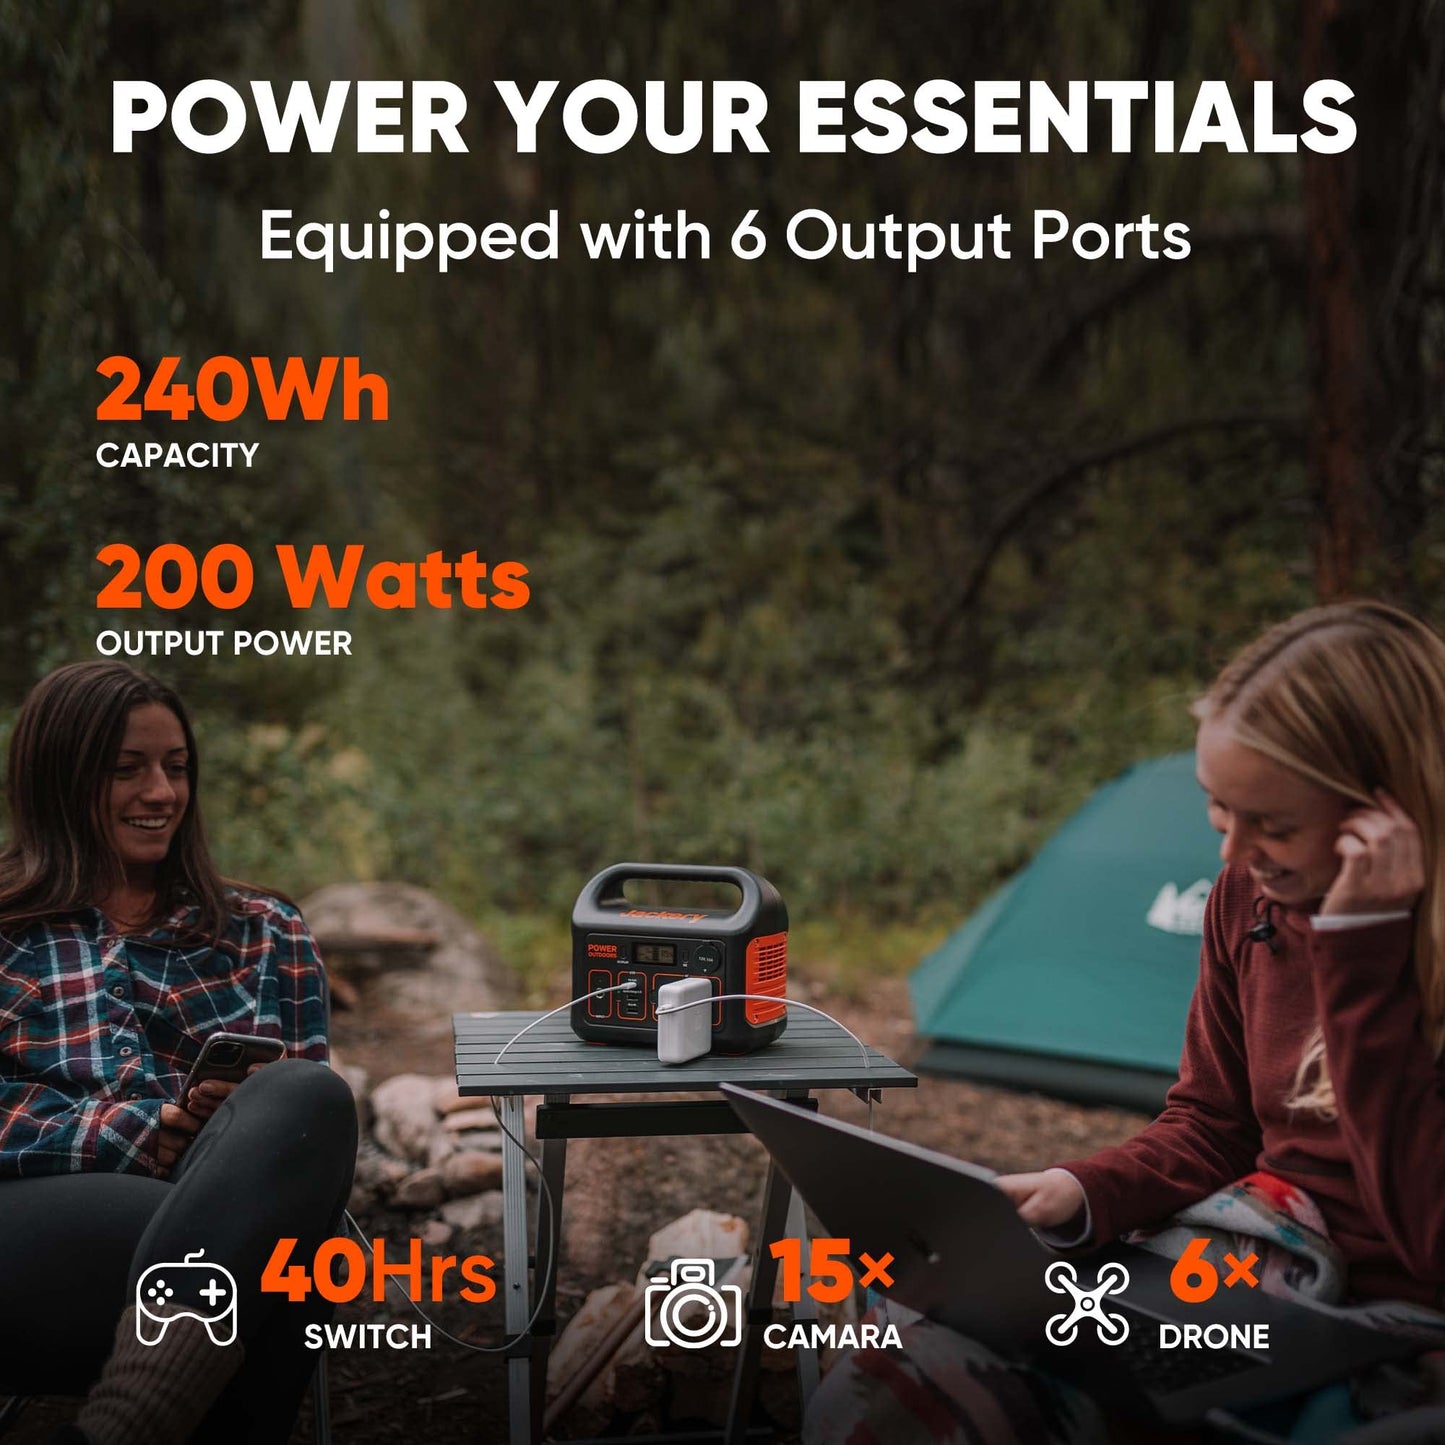 Jackery Portable Power Station Explorer 240, 240Wh Backup Lithium Battery, 110V/200W Pure Sine Wave AC Outlet, Solar Generator (Solar Panel Not Included) for Outdoors Camping Travel Hunting Emergency Portable Power Station 240